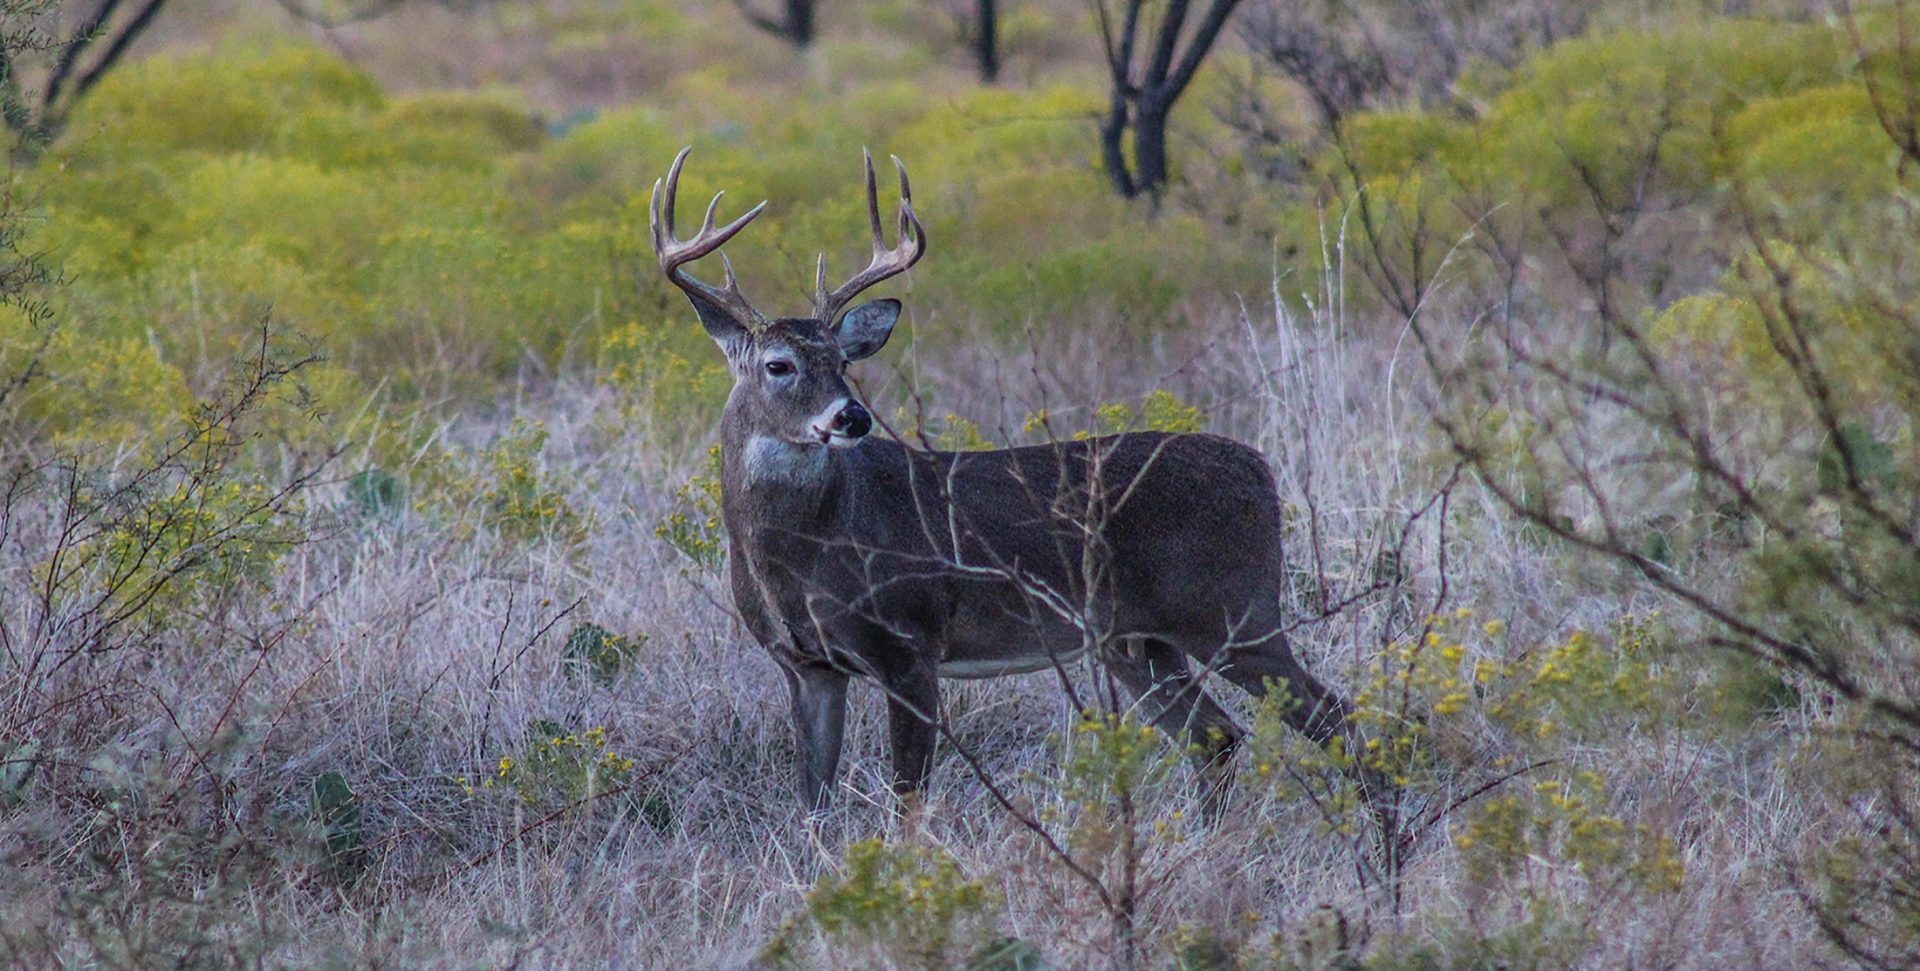 Texas archery deer hunters must ensure safety while in the field